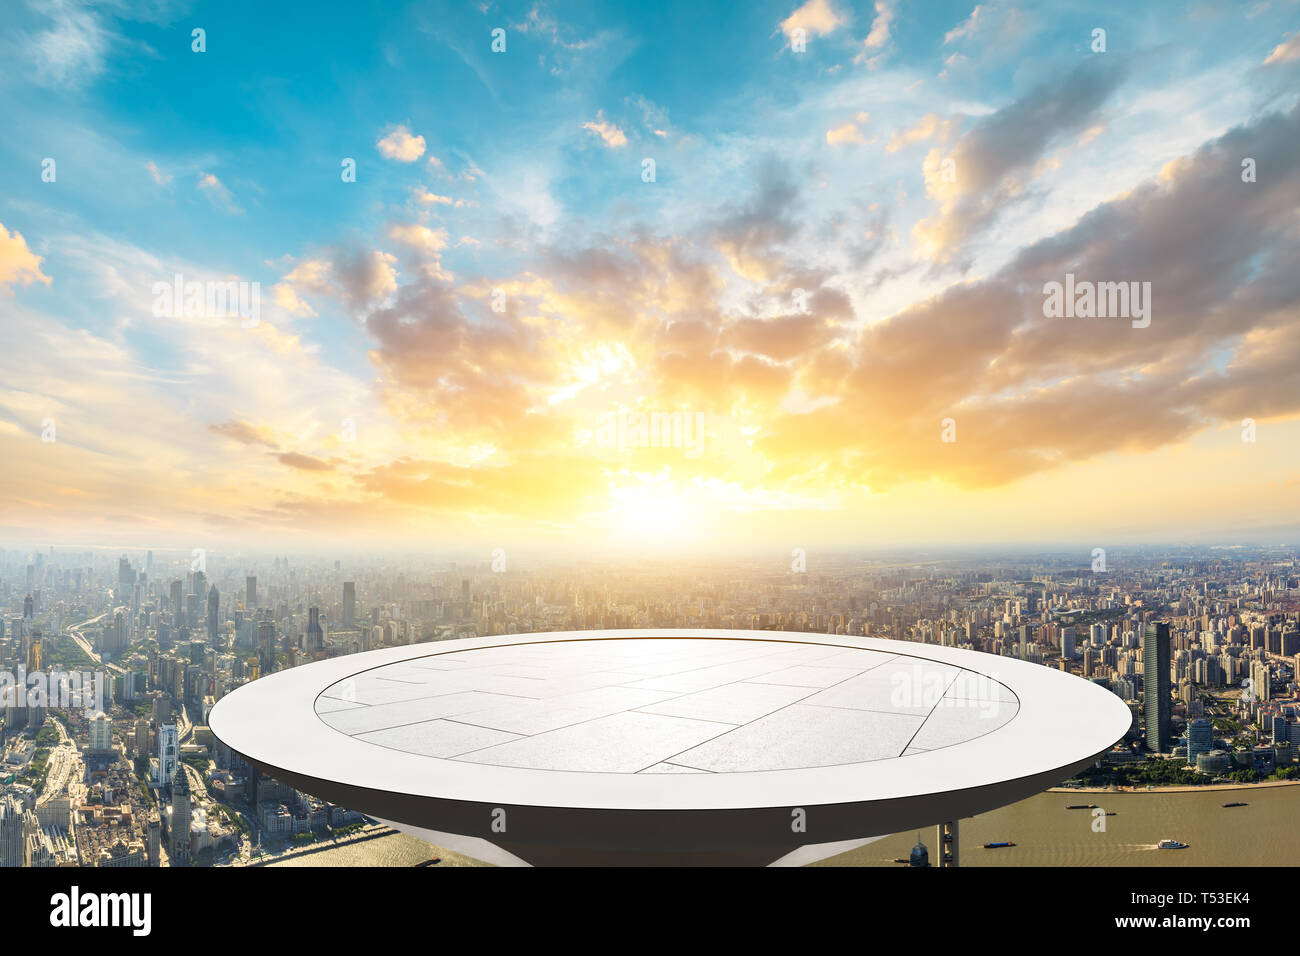 Shanghai city skyline and empty square platform with beautiful clouds at sunset,high angle view Stock Photo